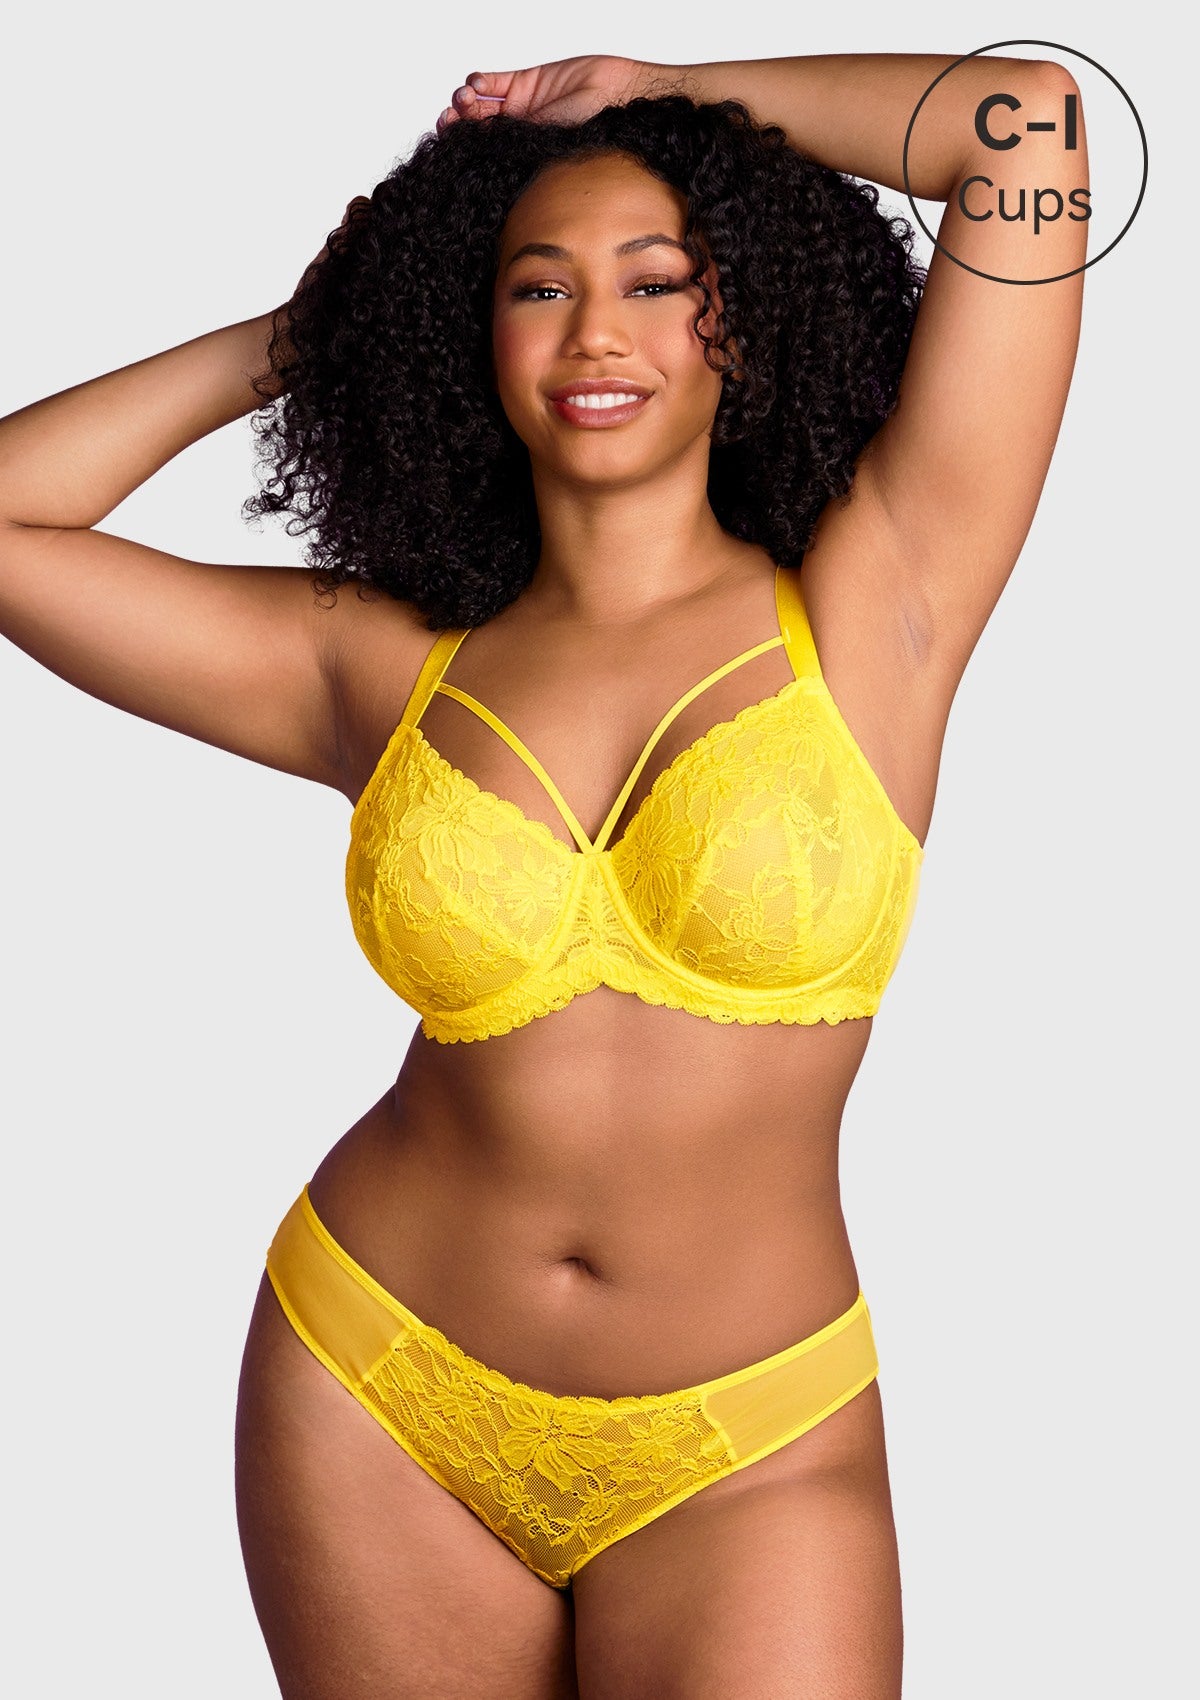 HSIA Unlined Lace Mesh Minimizer Bra For Large Breasts, Full Coverage - Bright Yellow / 38 / I